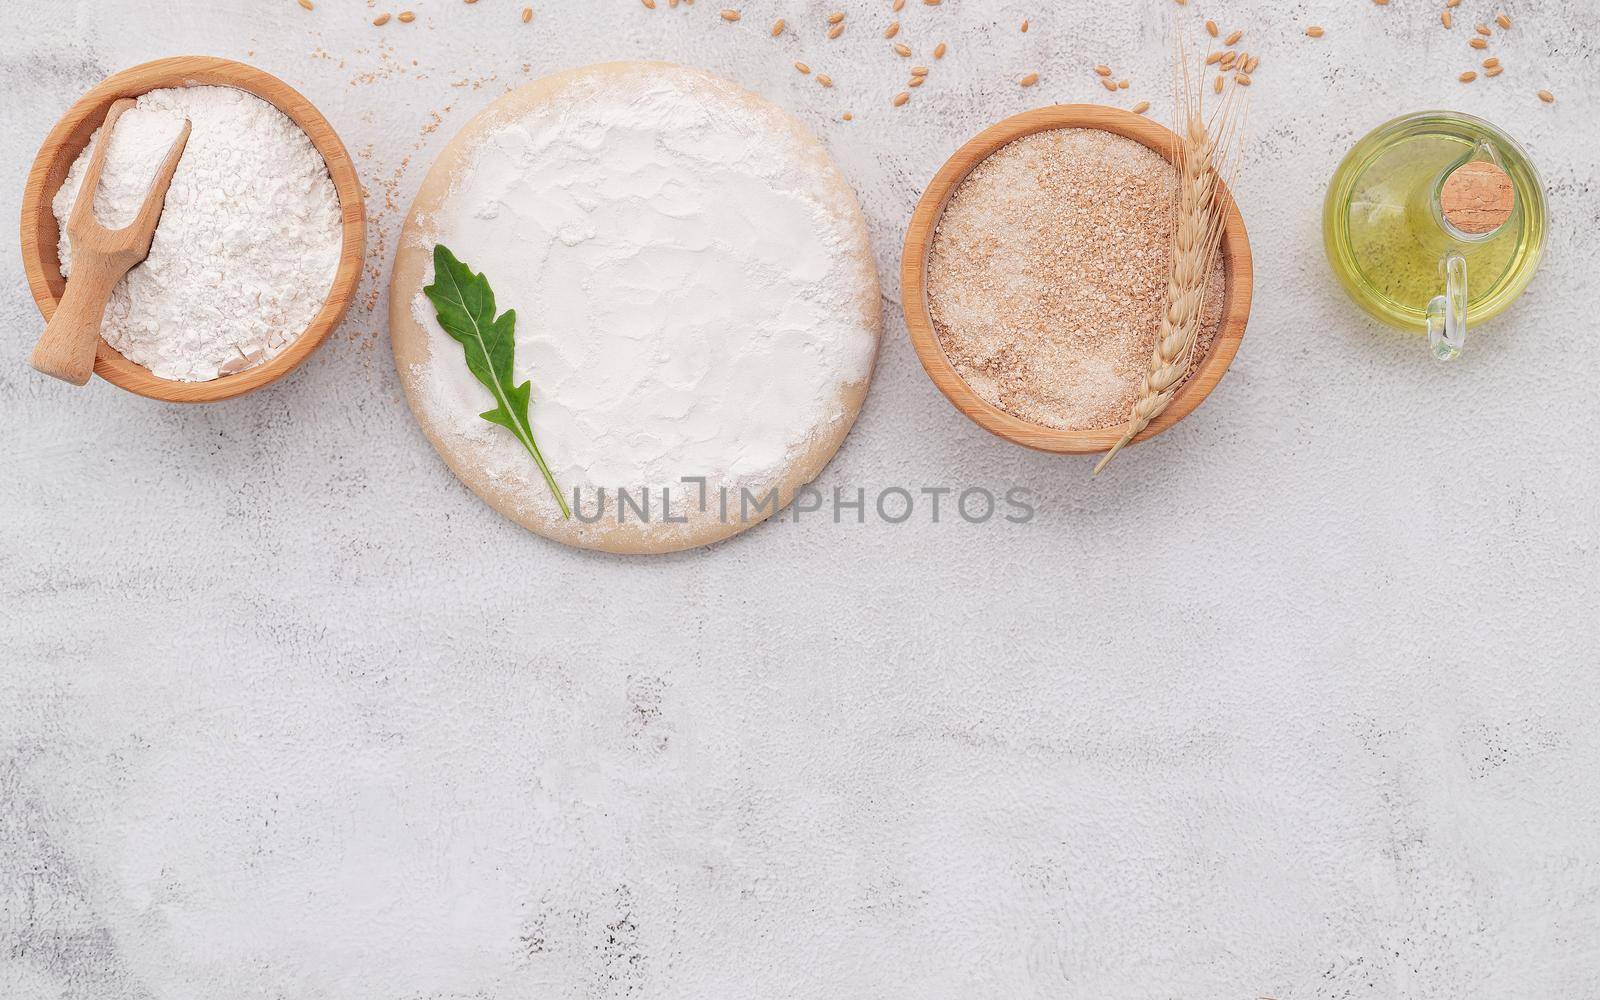 The ingredients for homemade pizza dough with wheat ears ,wheat flour and wheat grains set up on white concrete background. by kerdkanno